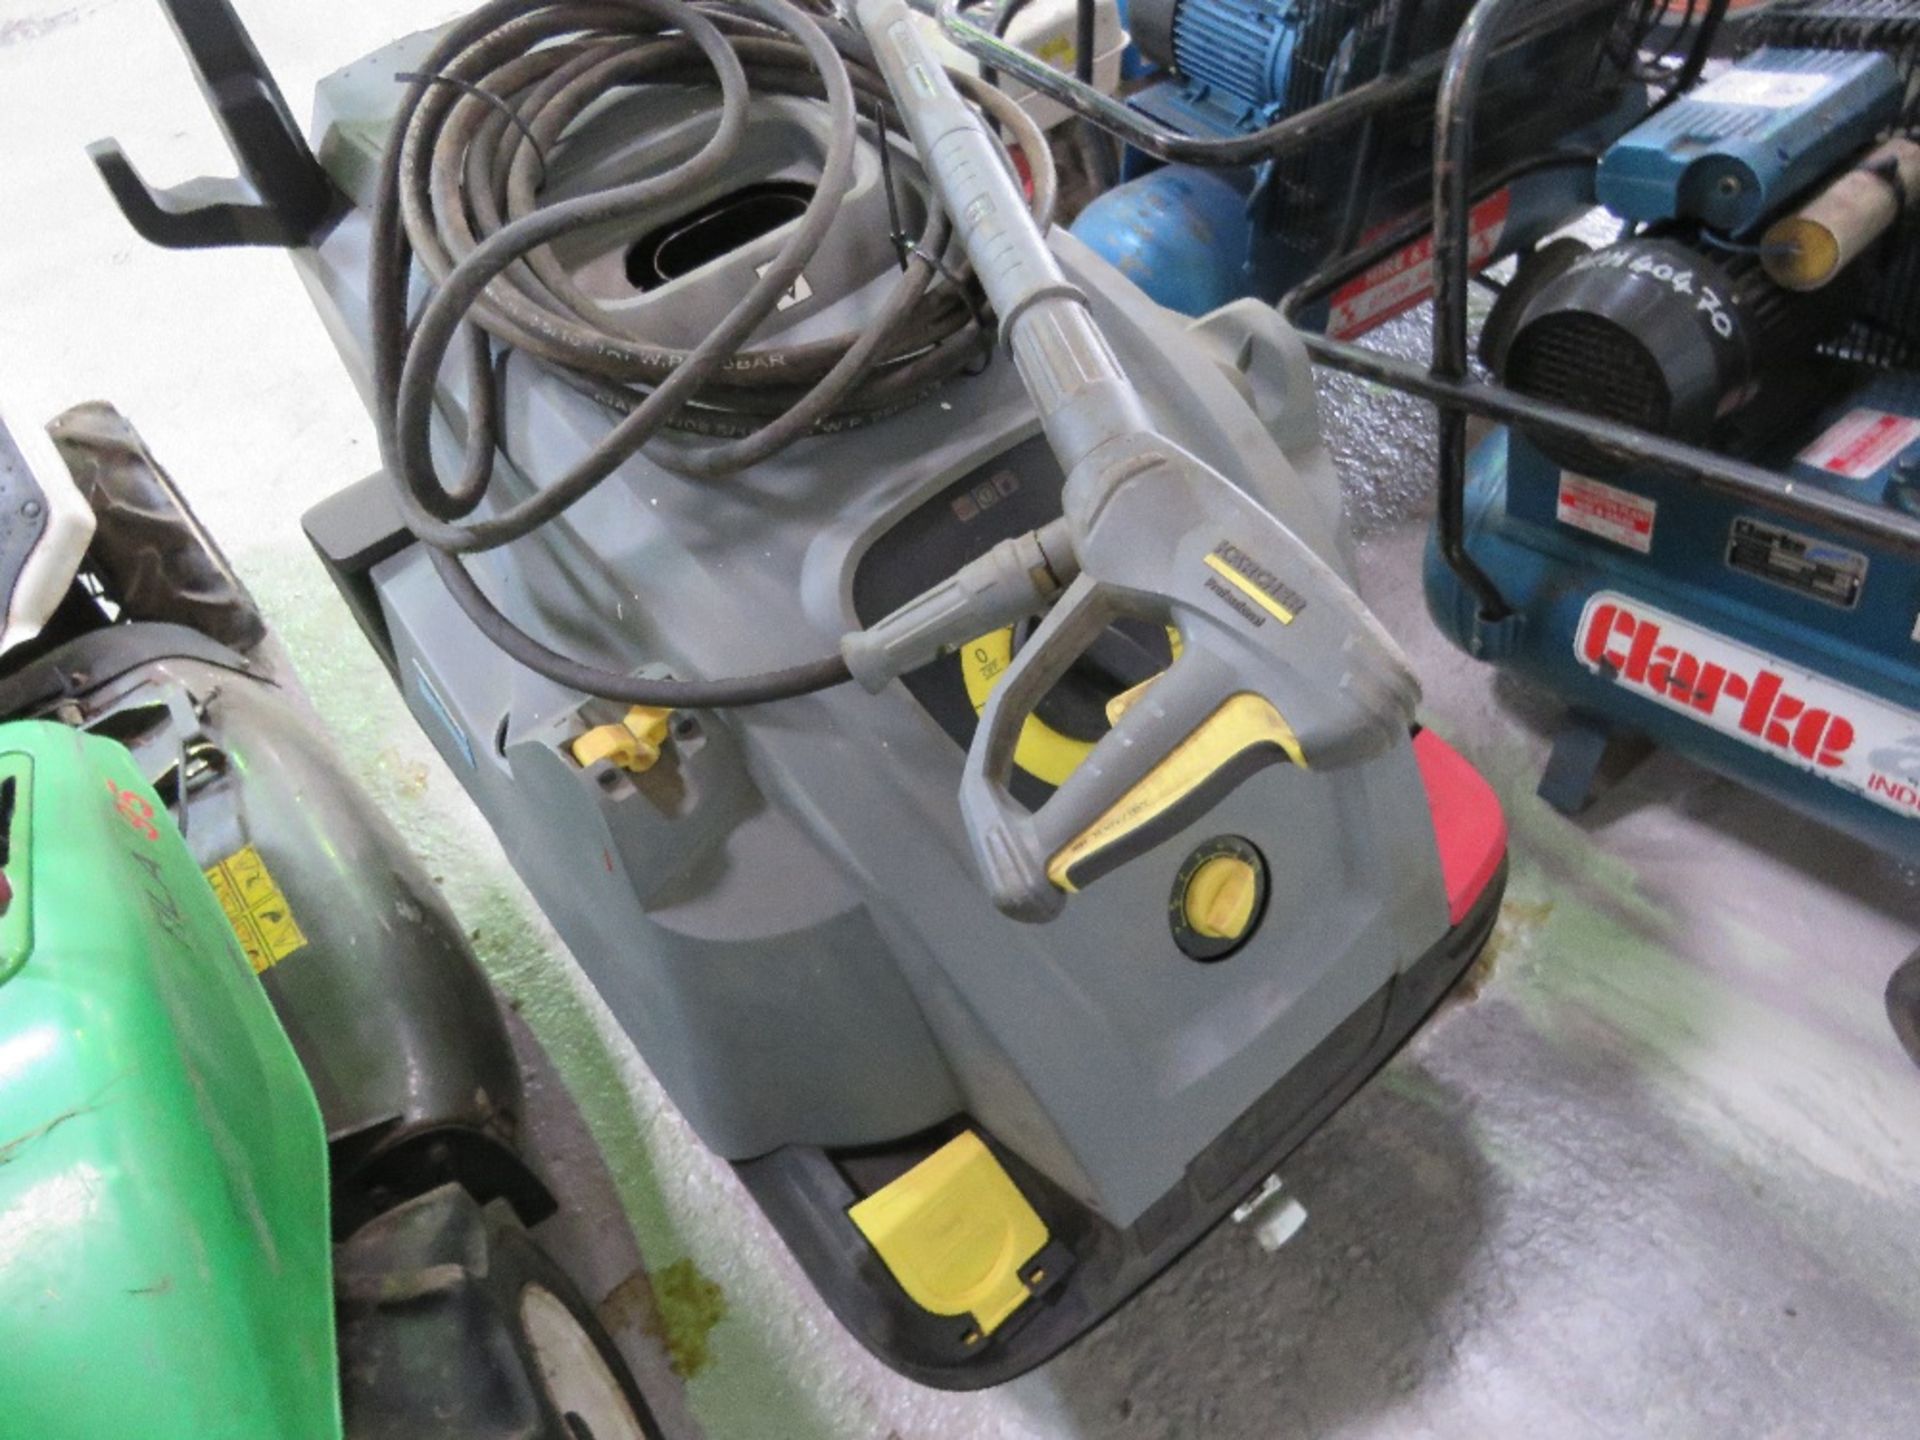 KARCHER 240VOLT PROFESSIONAL STEAM CLEANER WITH LANCE AND HOSE. UNTESTED, CONDITION UNKNOWN. - Image 3 of 3